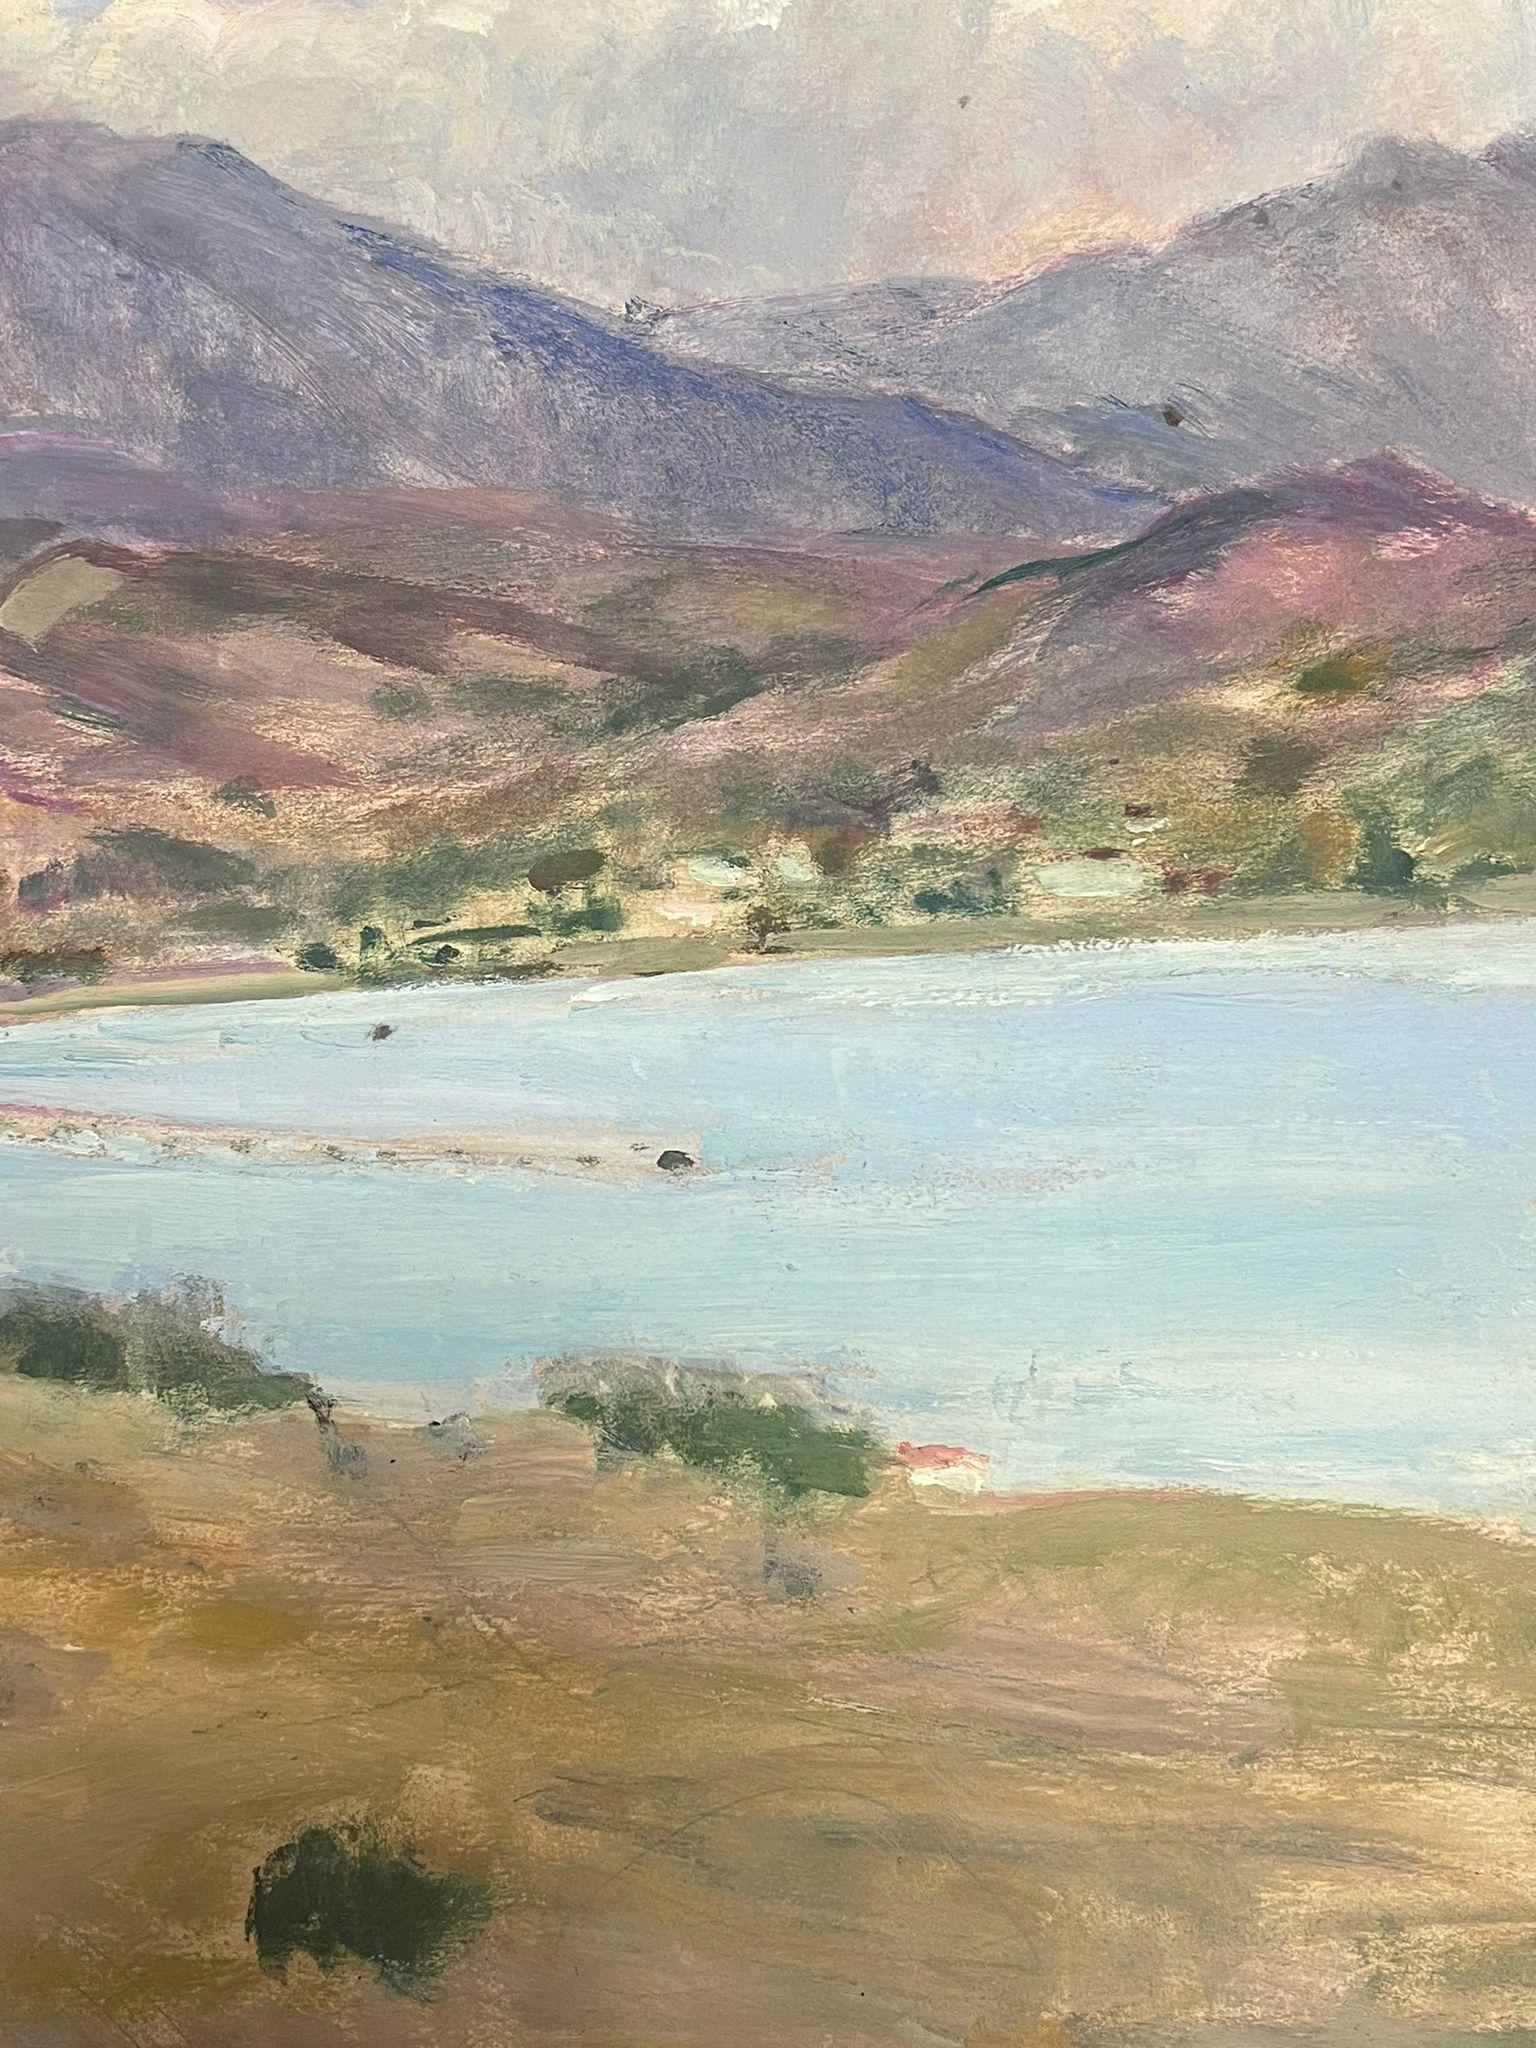 French Landscape
by Y. Blanchon, French 1950's Impressionist 
gouache on artist paper, unframed
painting: 15 x 18 inches
provenance: from a large private collection of this artists work in Northern France
condition: original, good and sound